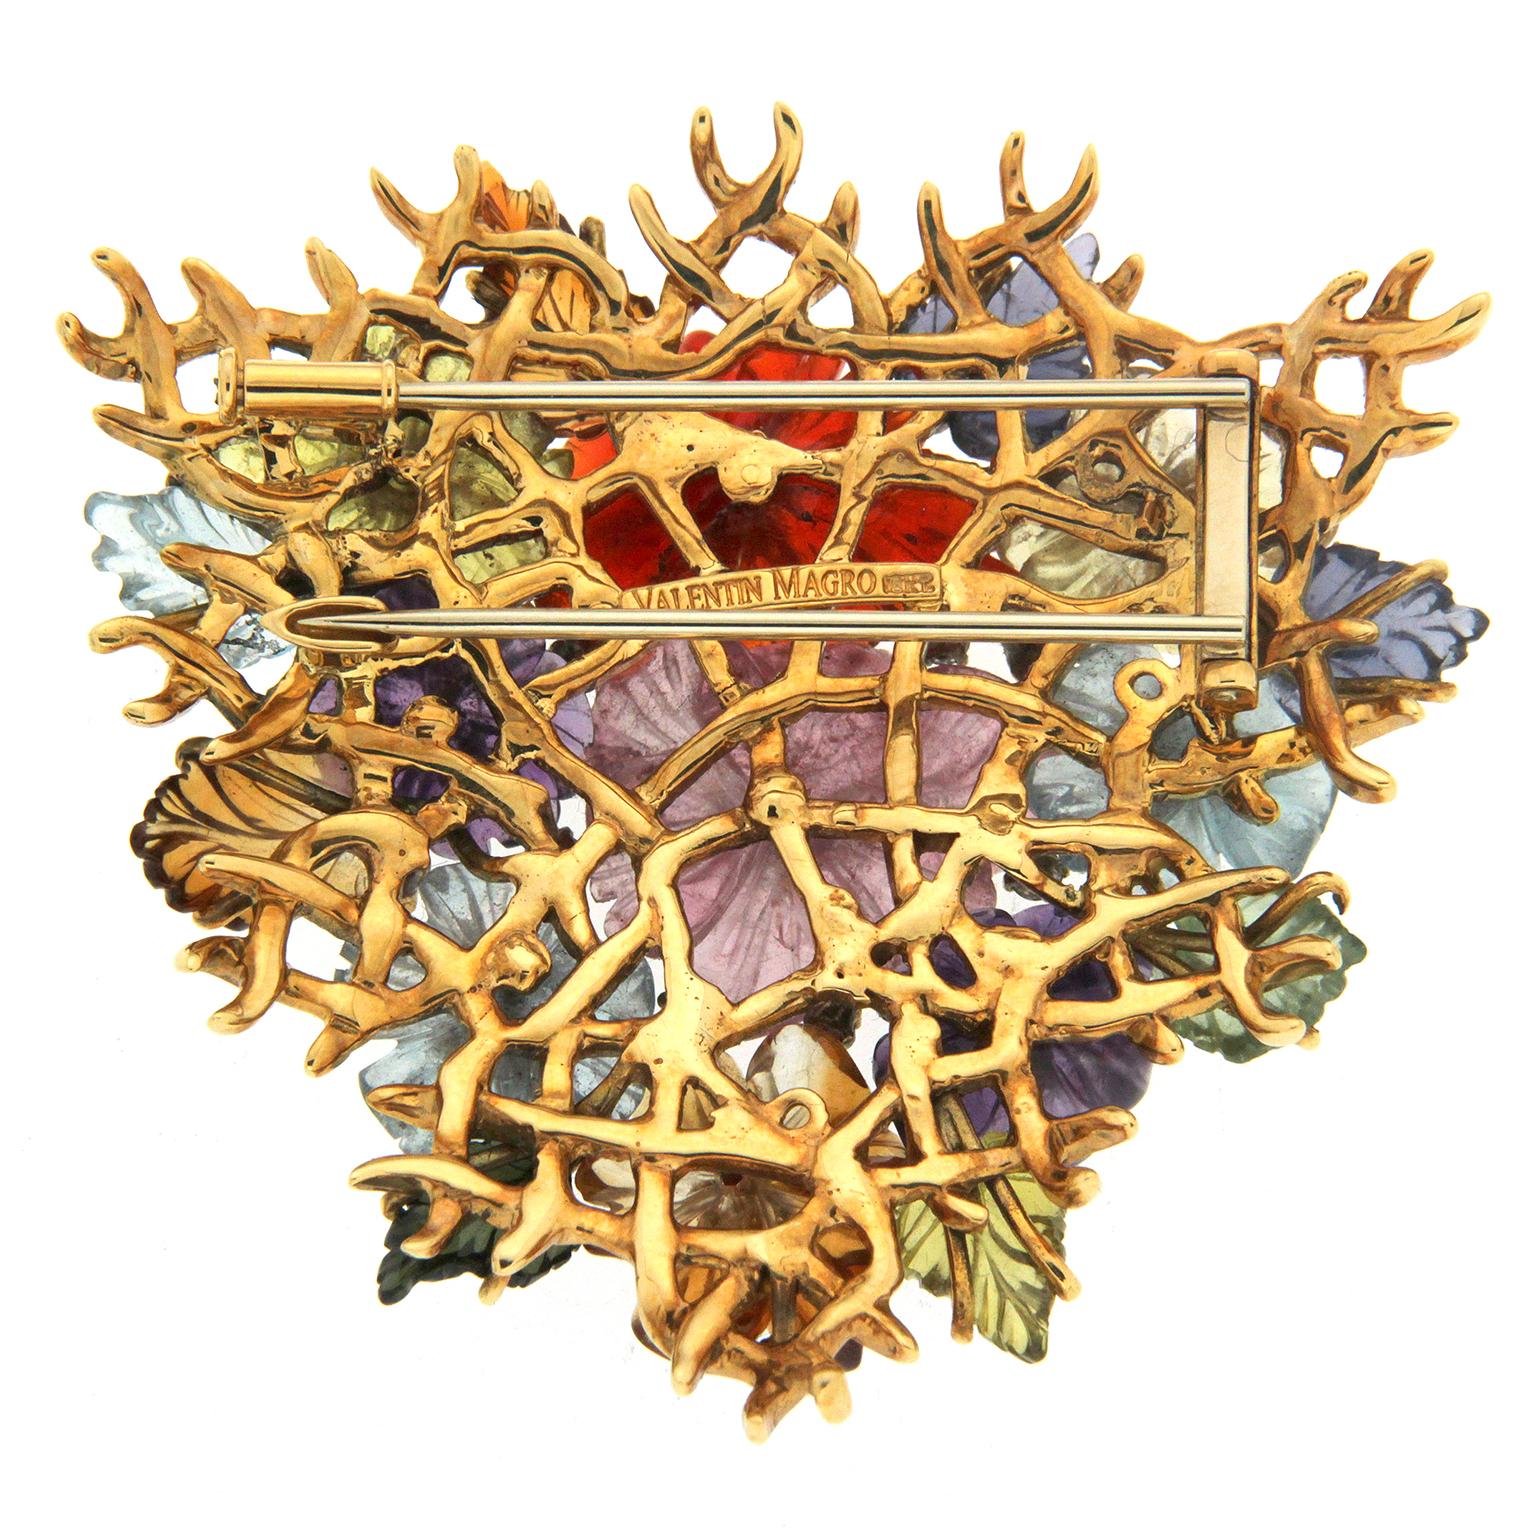 Flowers illustrated in jewels erupt from this brooch. Hand-carved colored gemstones are textured with scalloped edges to form flowers in various sizes. Brilliant cut diamonds bring light to the centers of each. Gemstones also form tapered leaves,